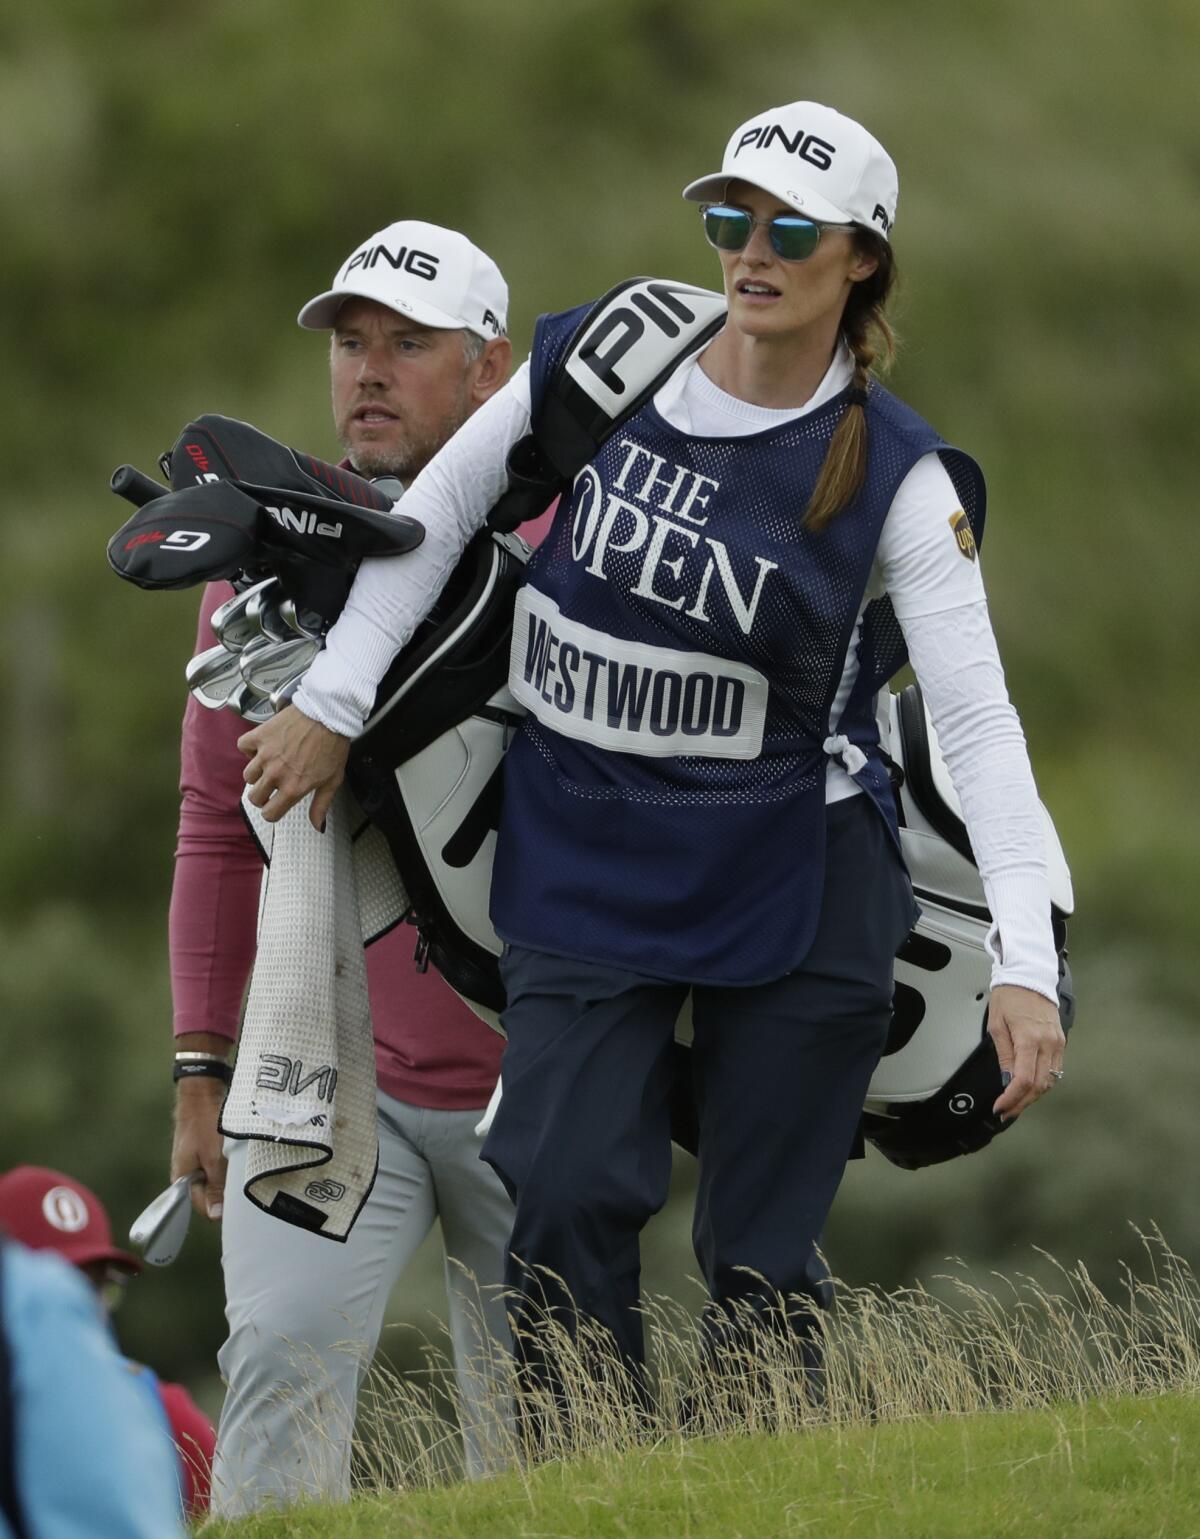 England's Lee Westwood with his caddie and girlfriend Helen Storey walk to the fifth hole.